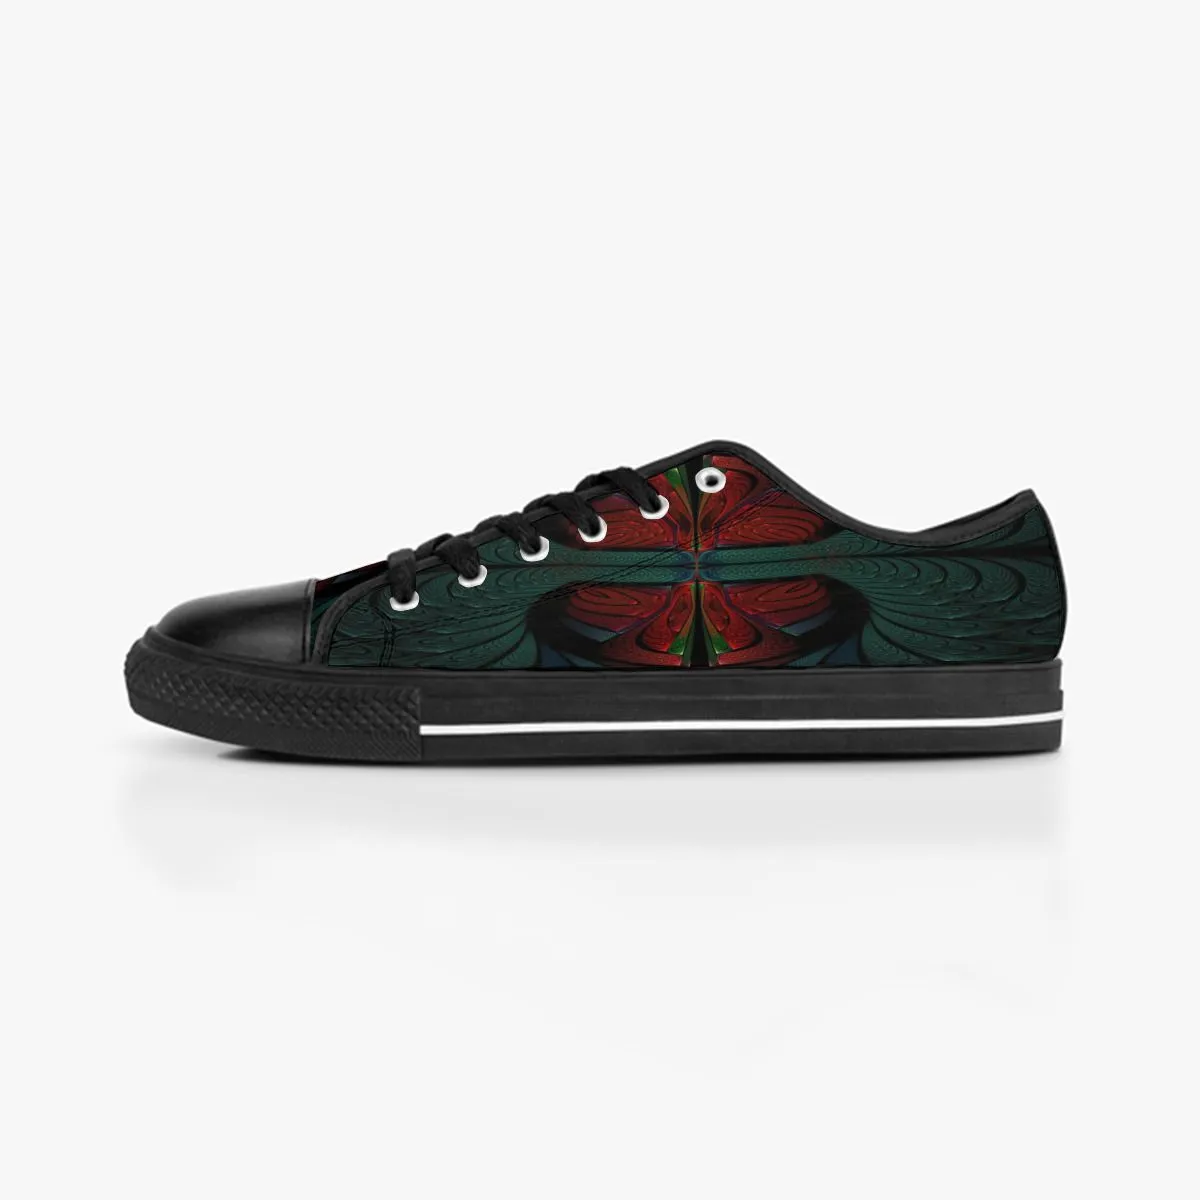 Men Stitch Shoes Custom Sneakers Hand Paint Canvas Women Fashion Black Green Low Breathable Walking Jogging Trainers